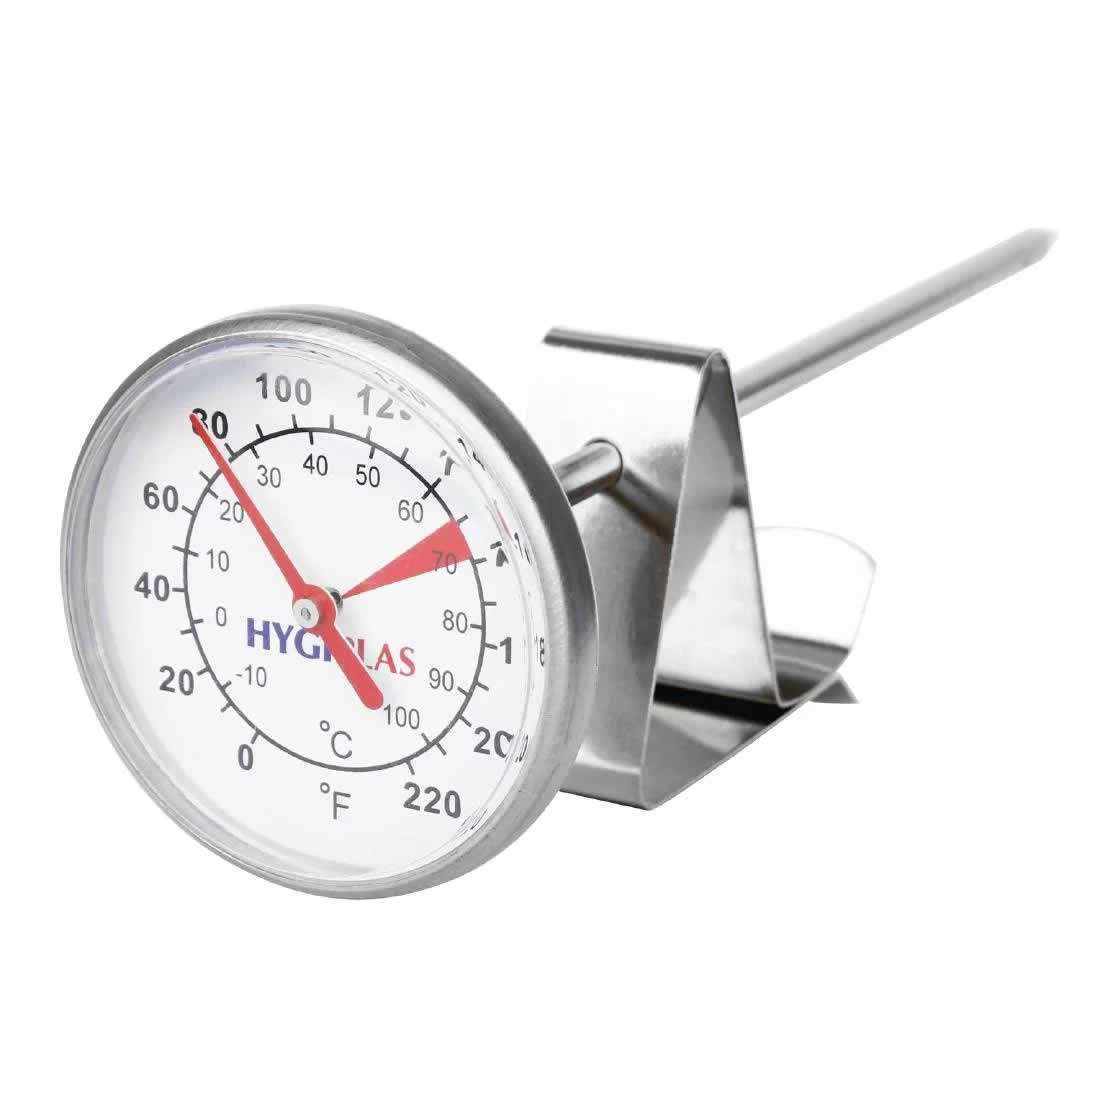 https://mobcater.com/wp-content/uploads/2020/03/coffee-thermometer.jpg